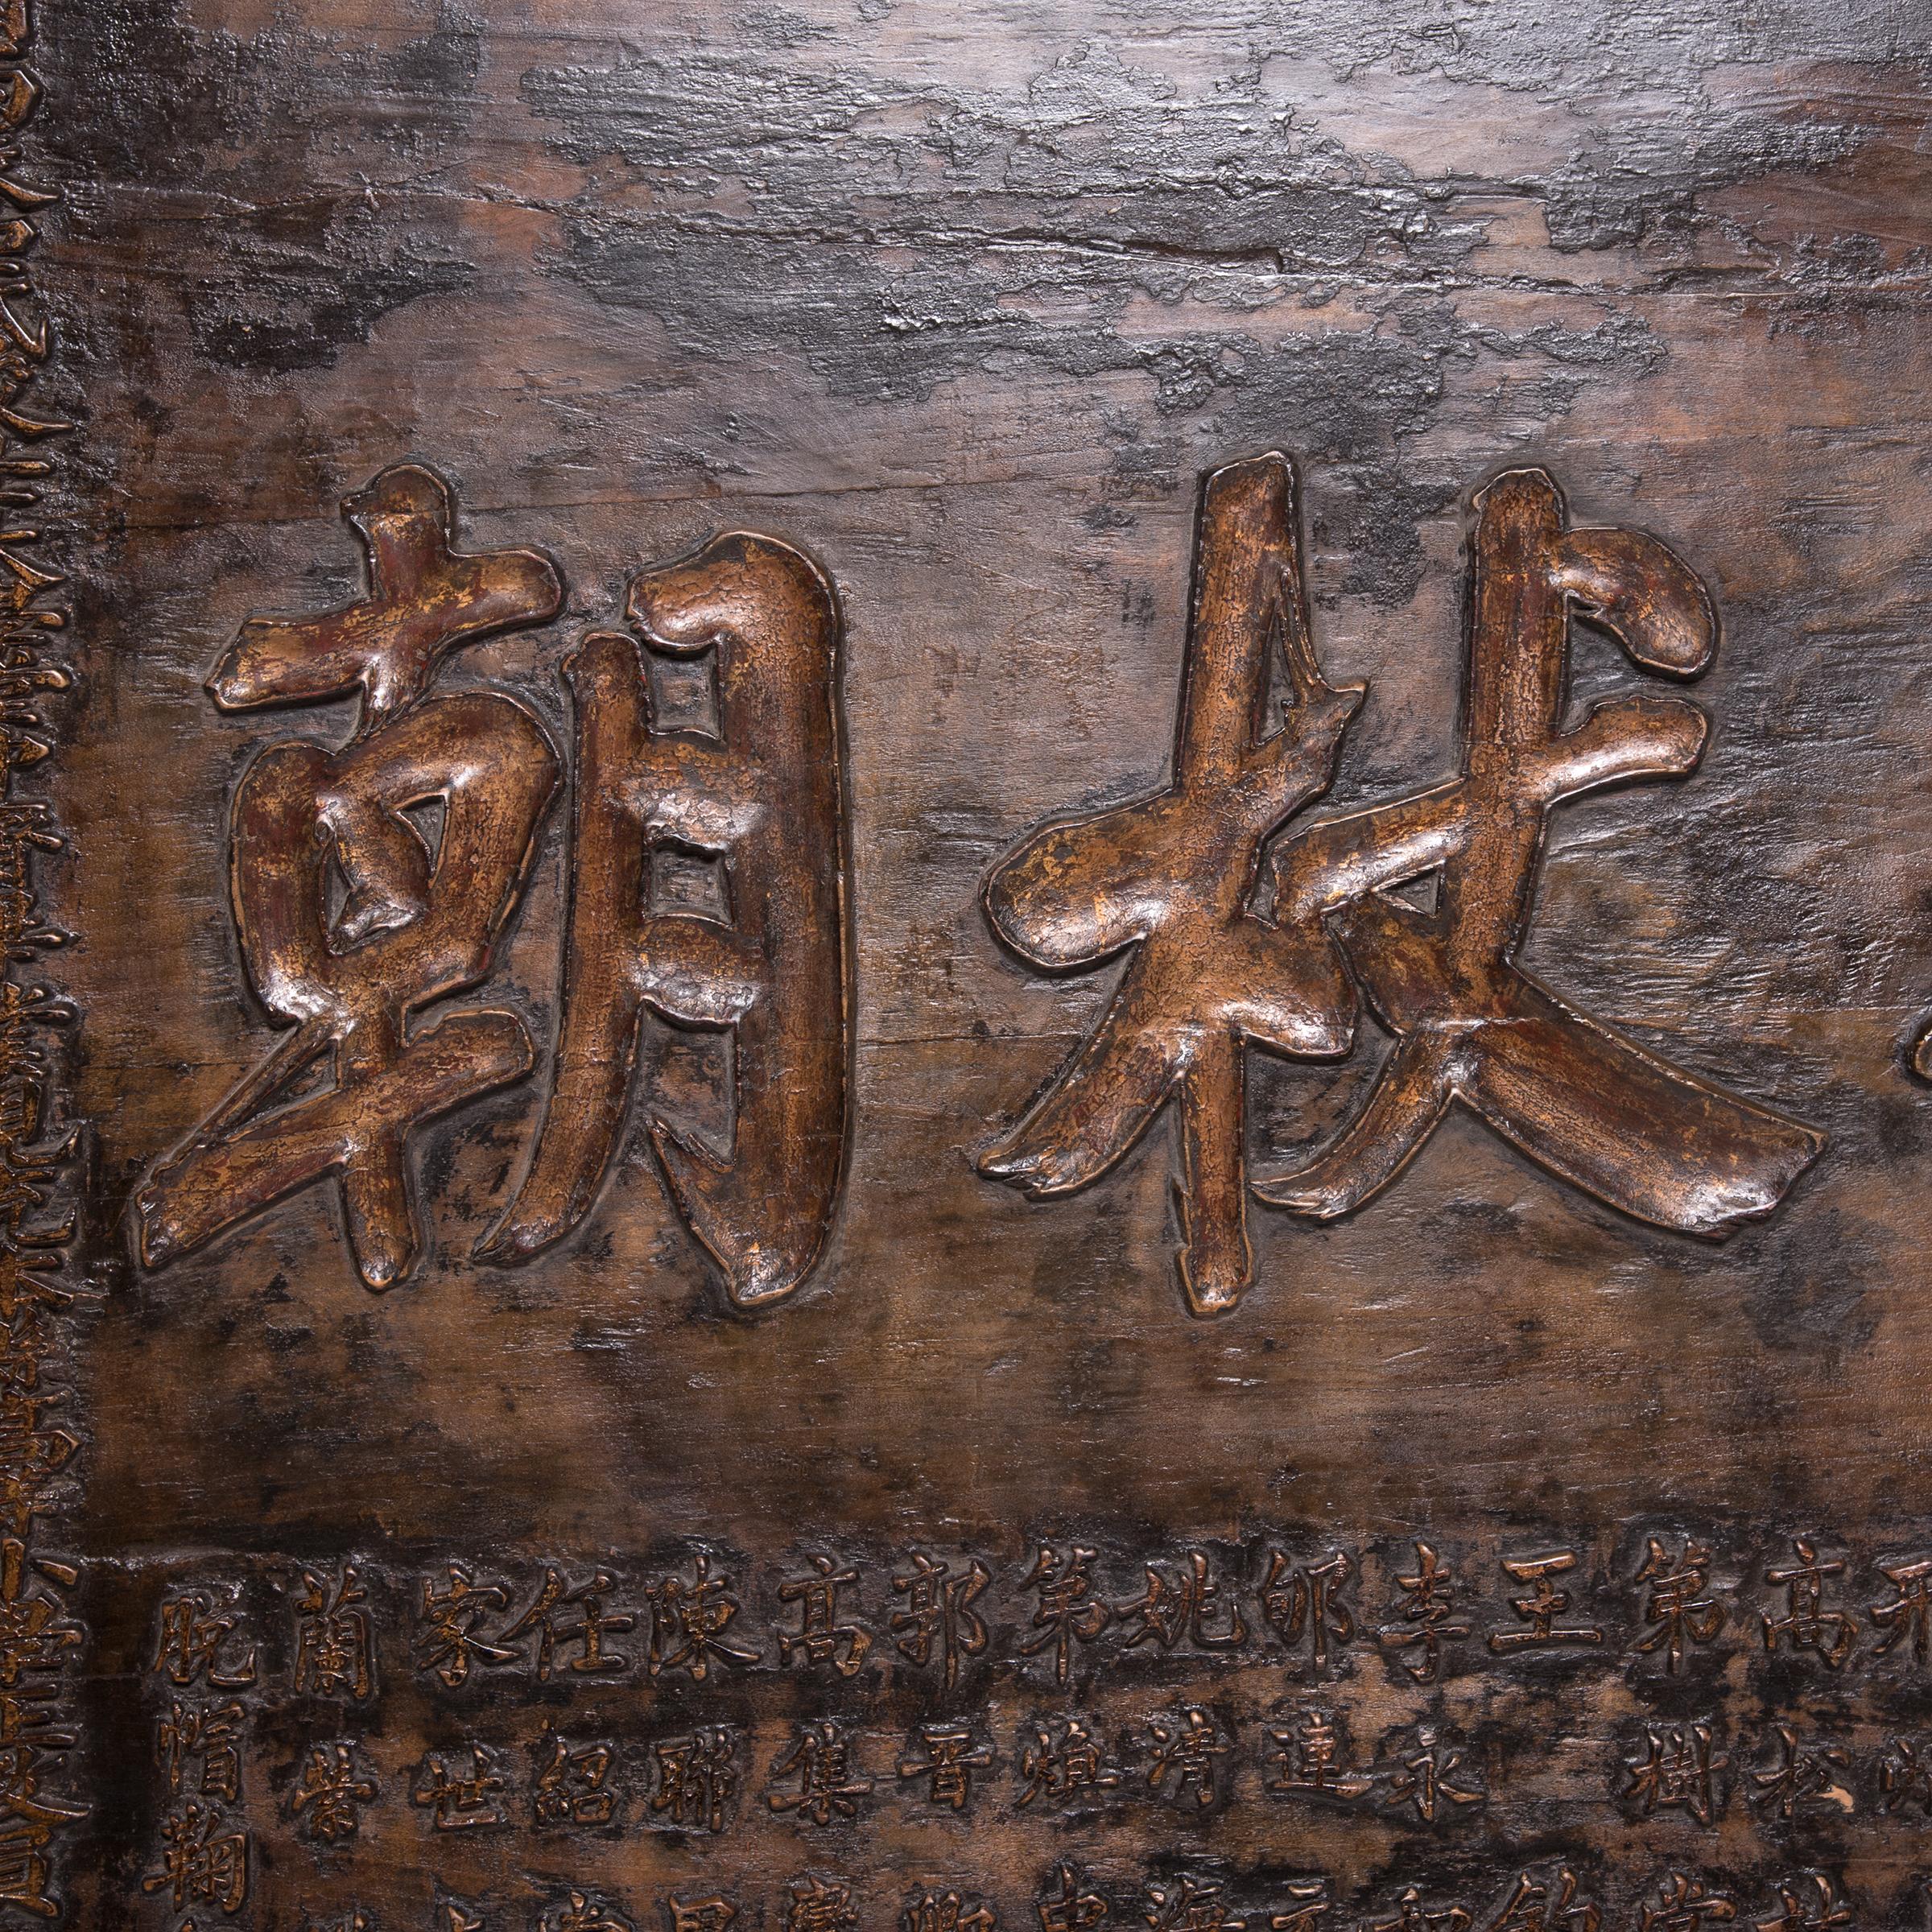 A 19th century northern Chinese sign of honor presented to an esteemed scholar on his 80th birthday. The large characters in the center read (from right to left), 